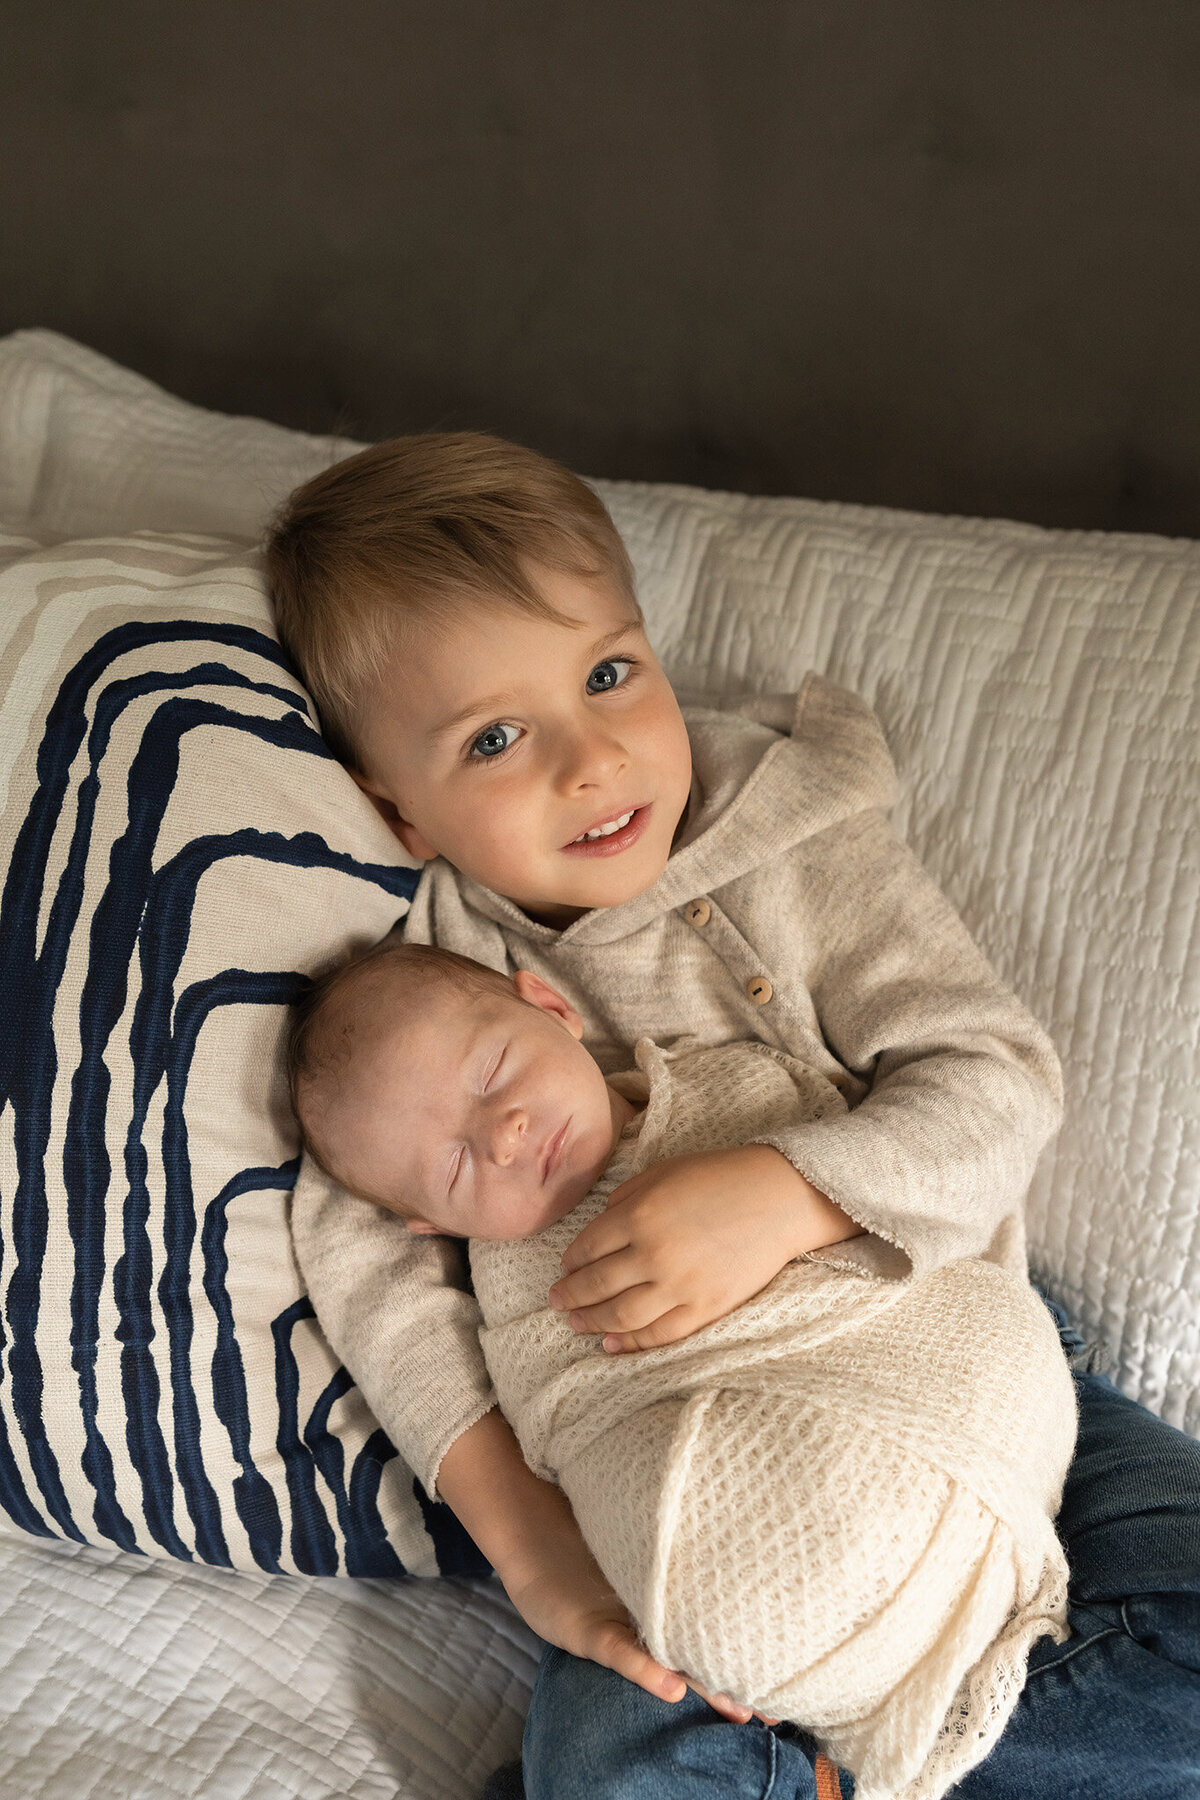 Baby Session where older brother hugs his new baby brother